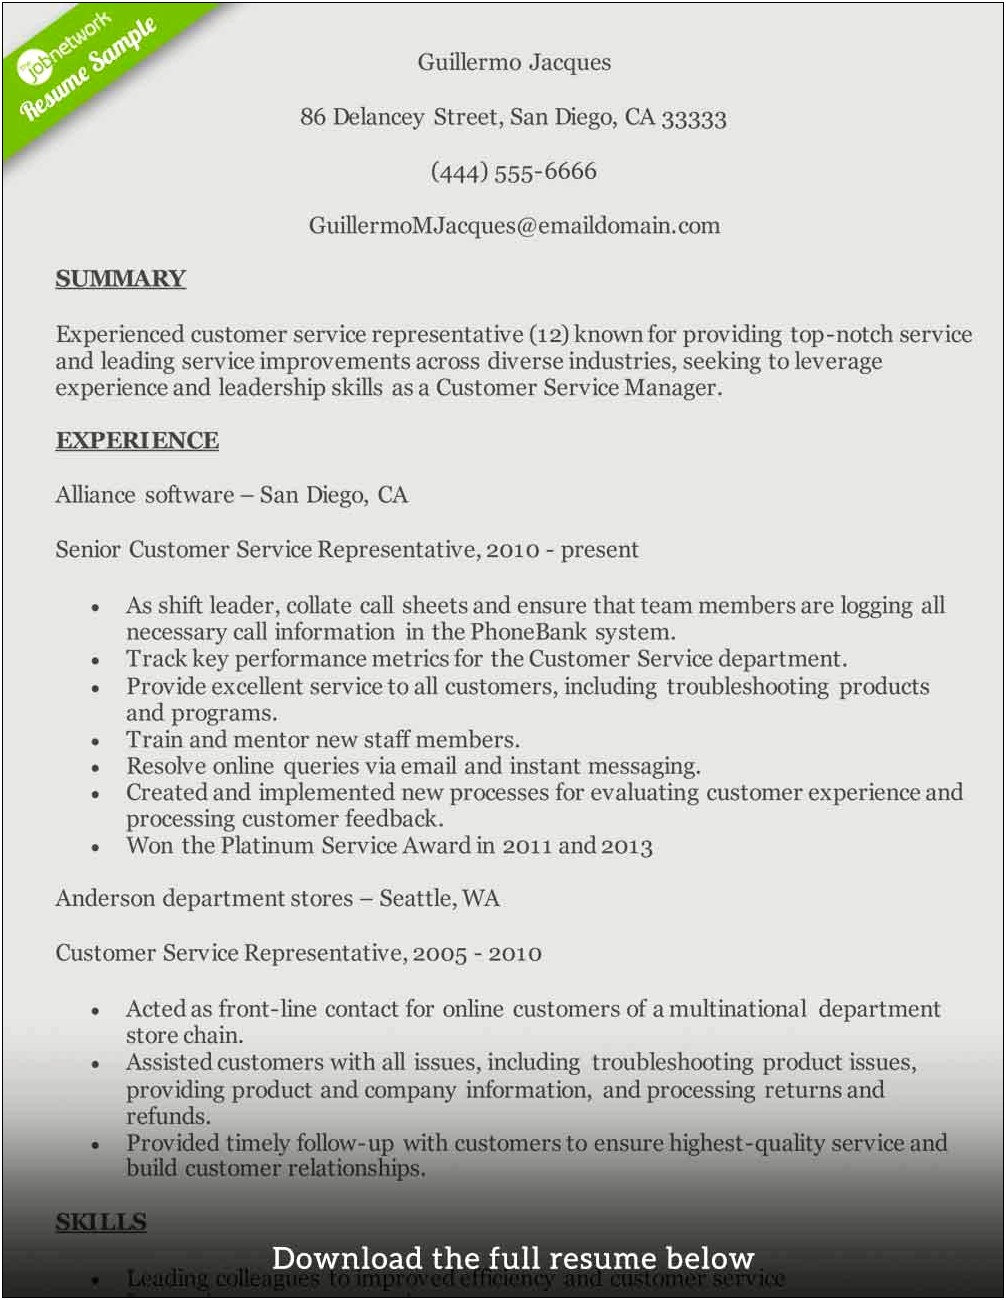 Resume Experience Examples From Mover To Customer Service